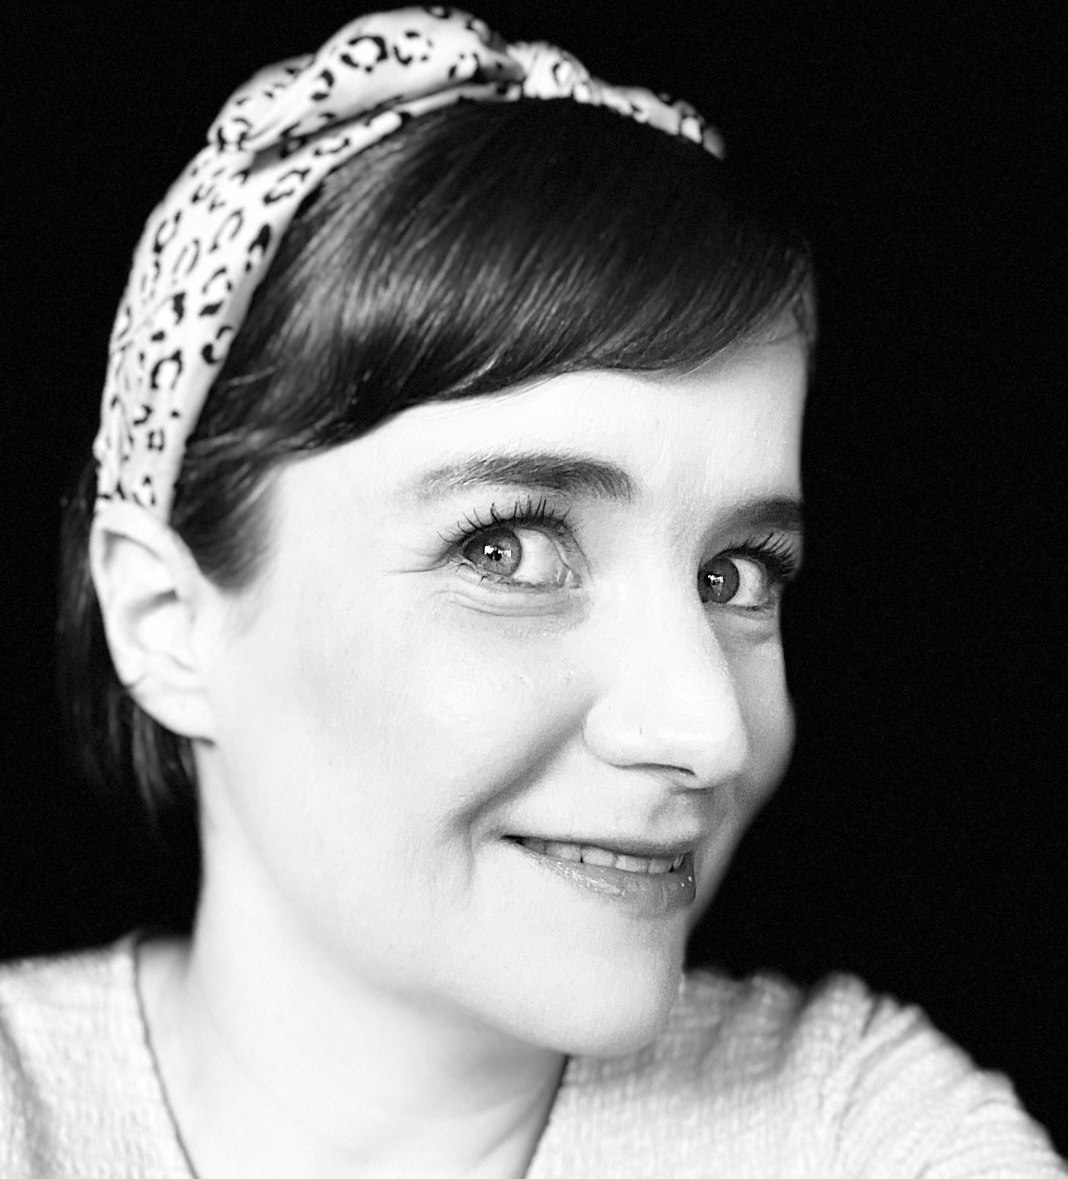 In a black and white photo, a woman with a thick headband and dark hair looks sideways into the camera with a slight smile.